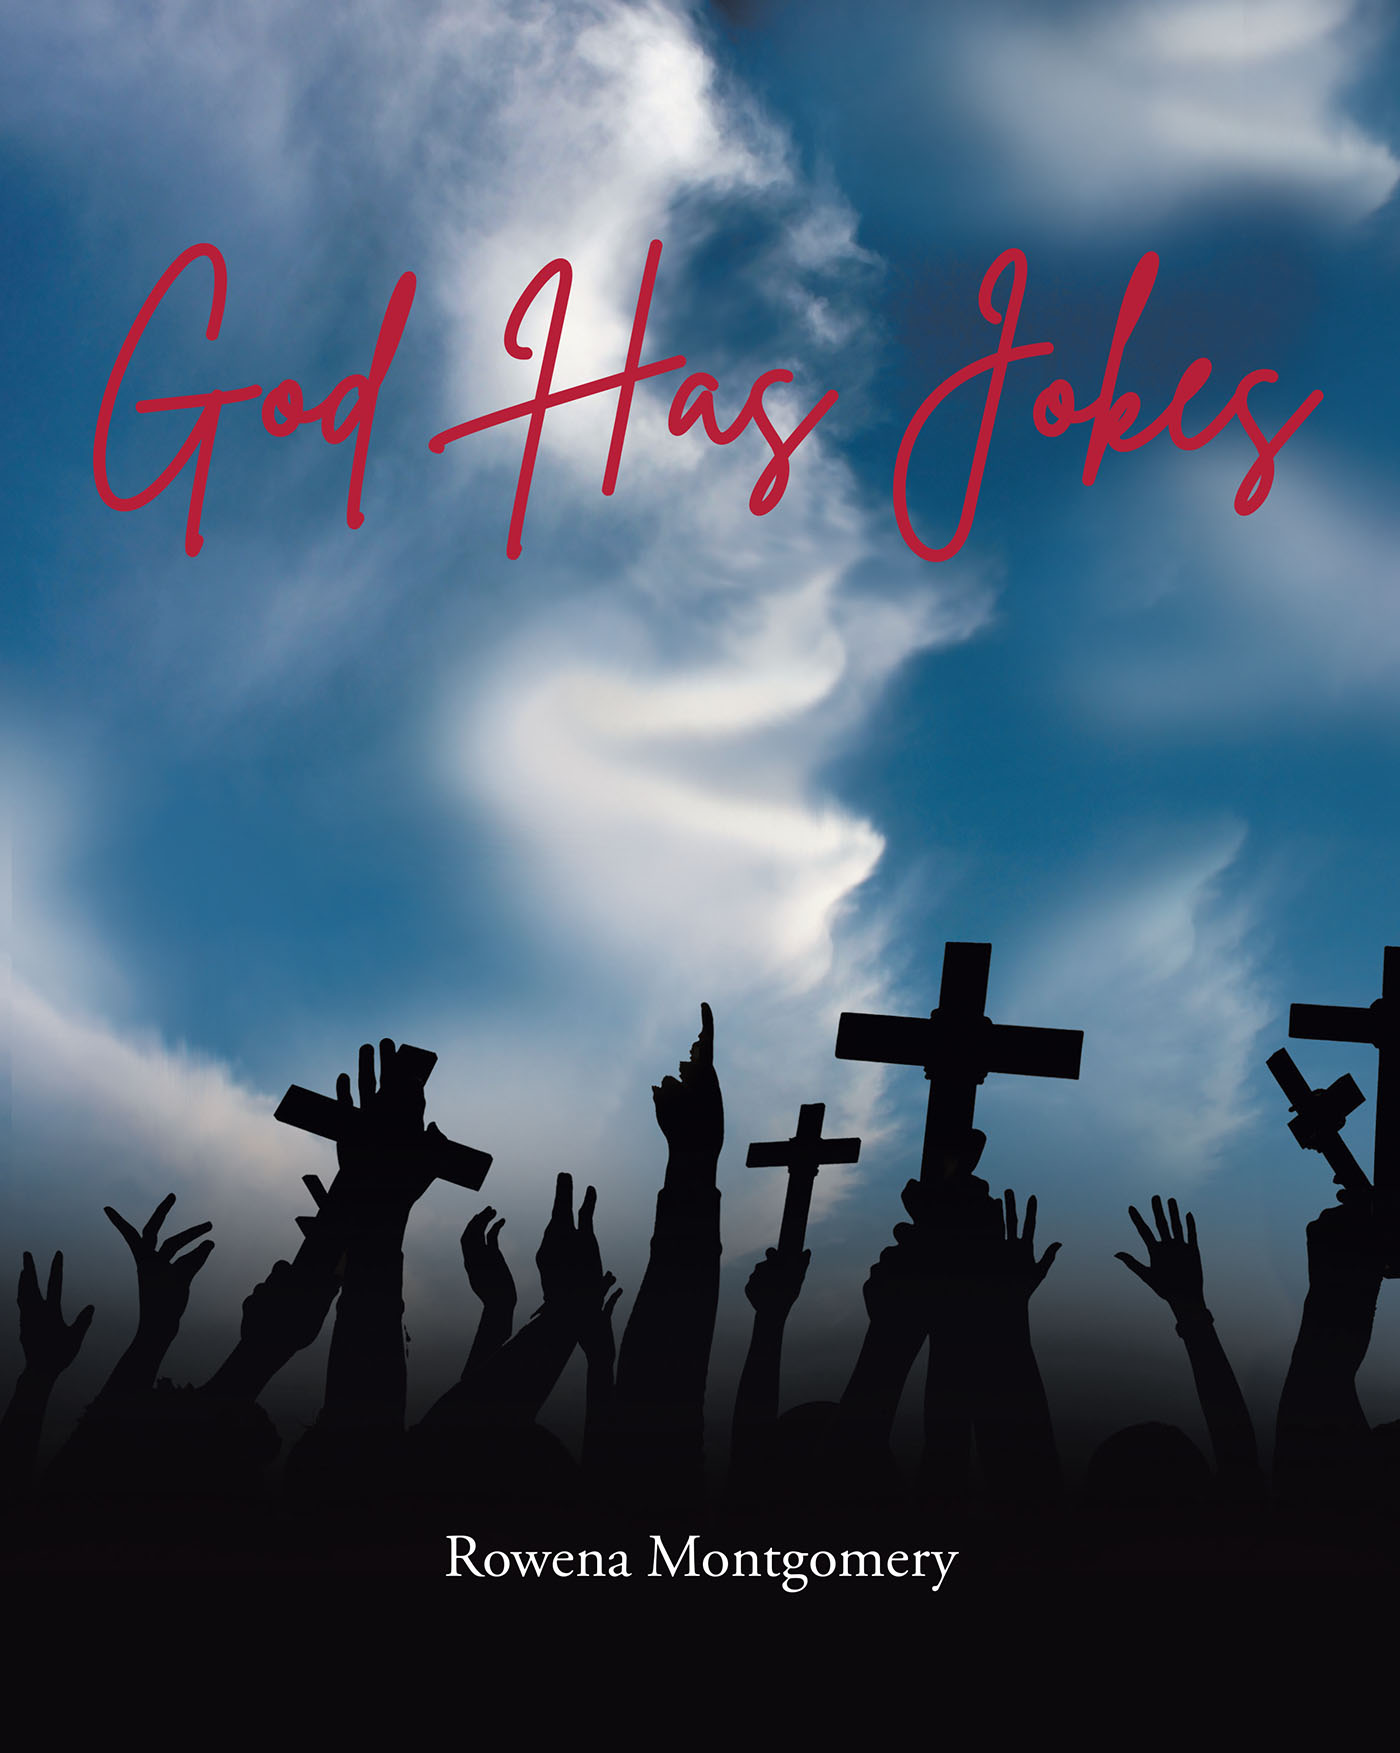 Rowena Montgomery’s Newly Released "God Has Jokes" is a Thoughtful Collection of Prayers and Reflections That Will Encourage and Comfort